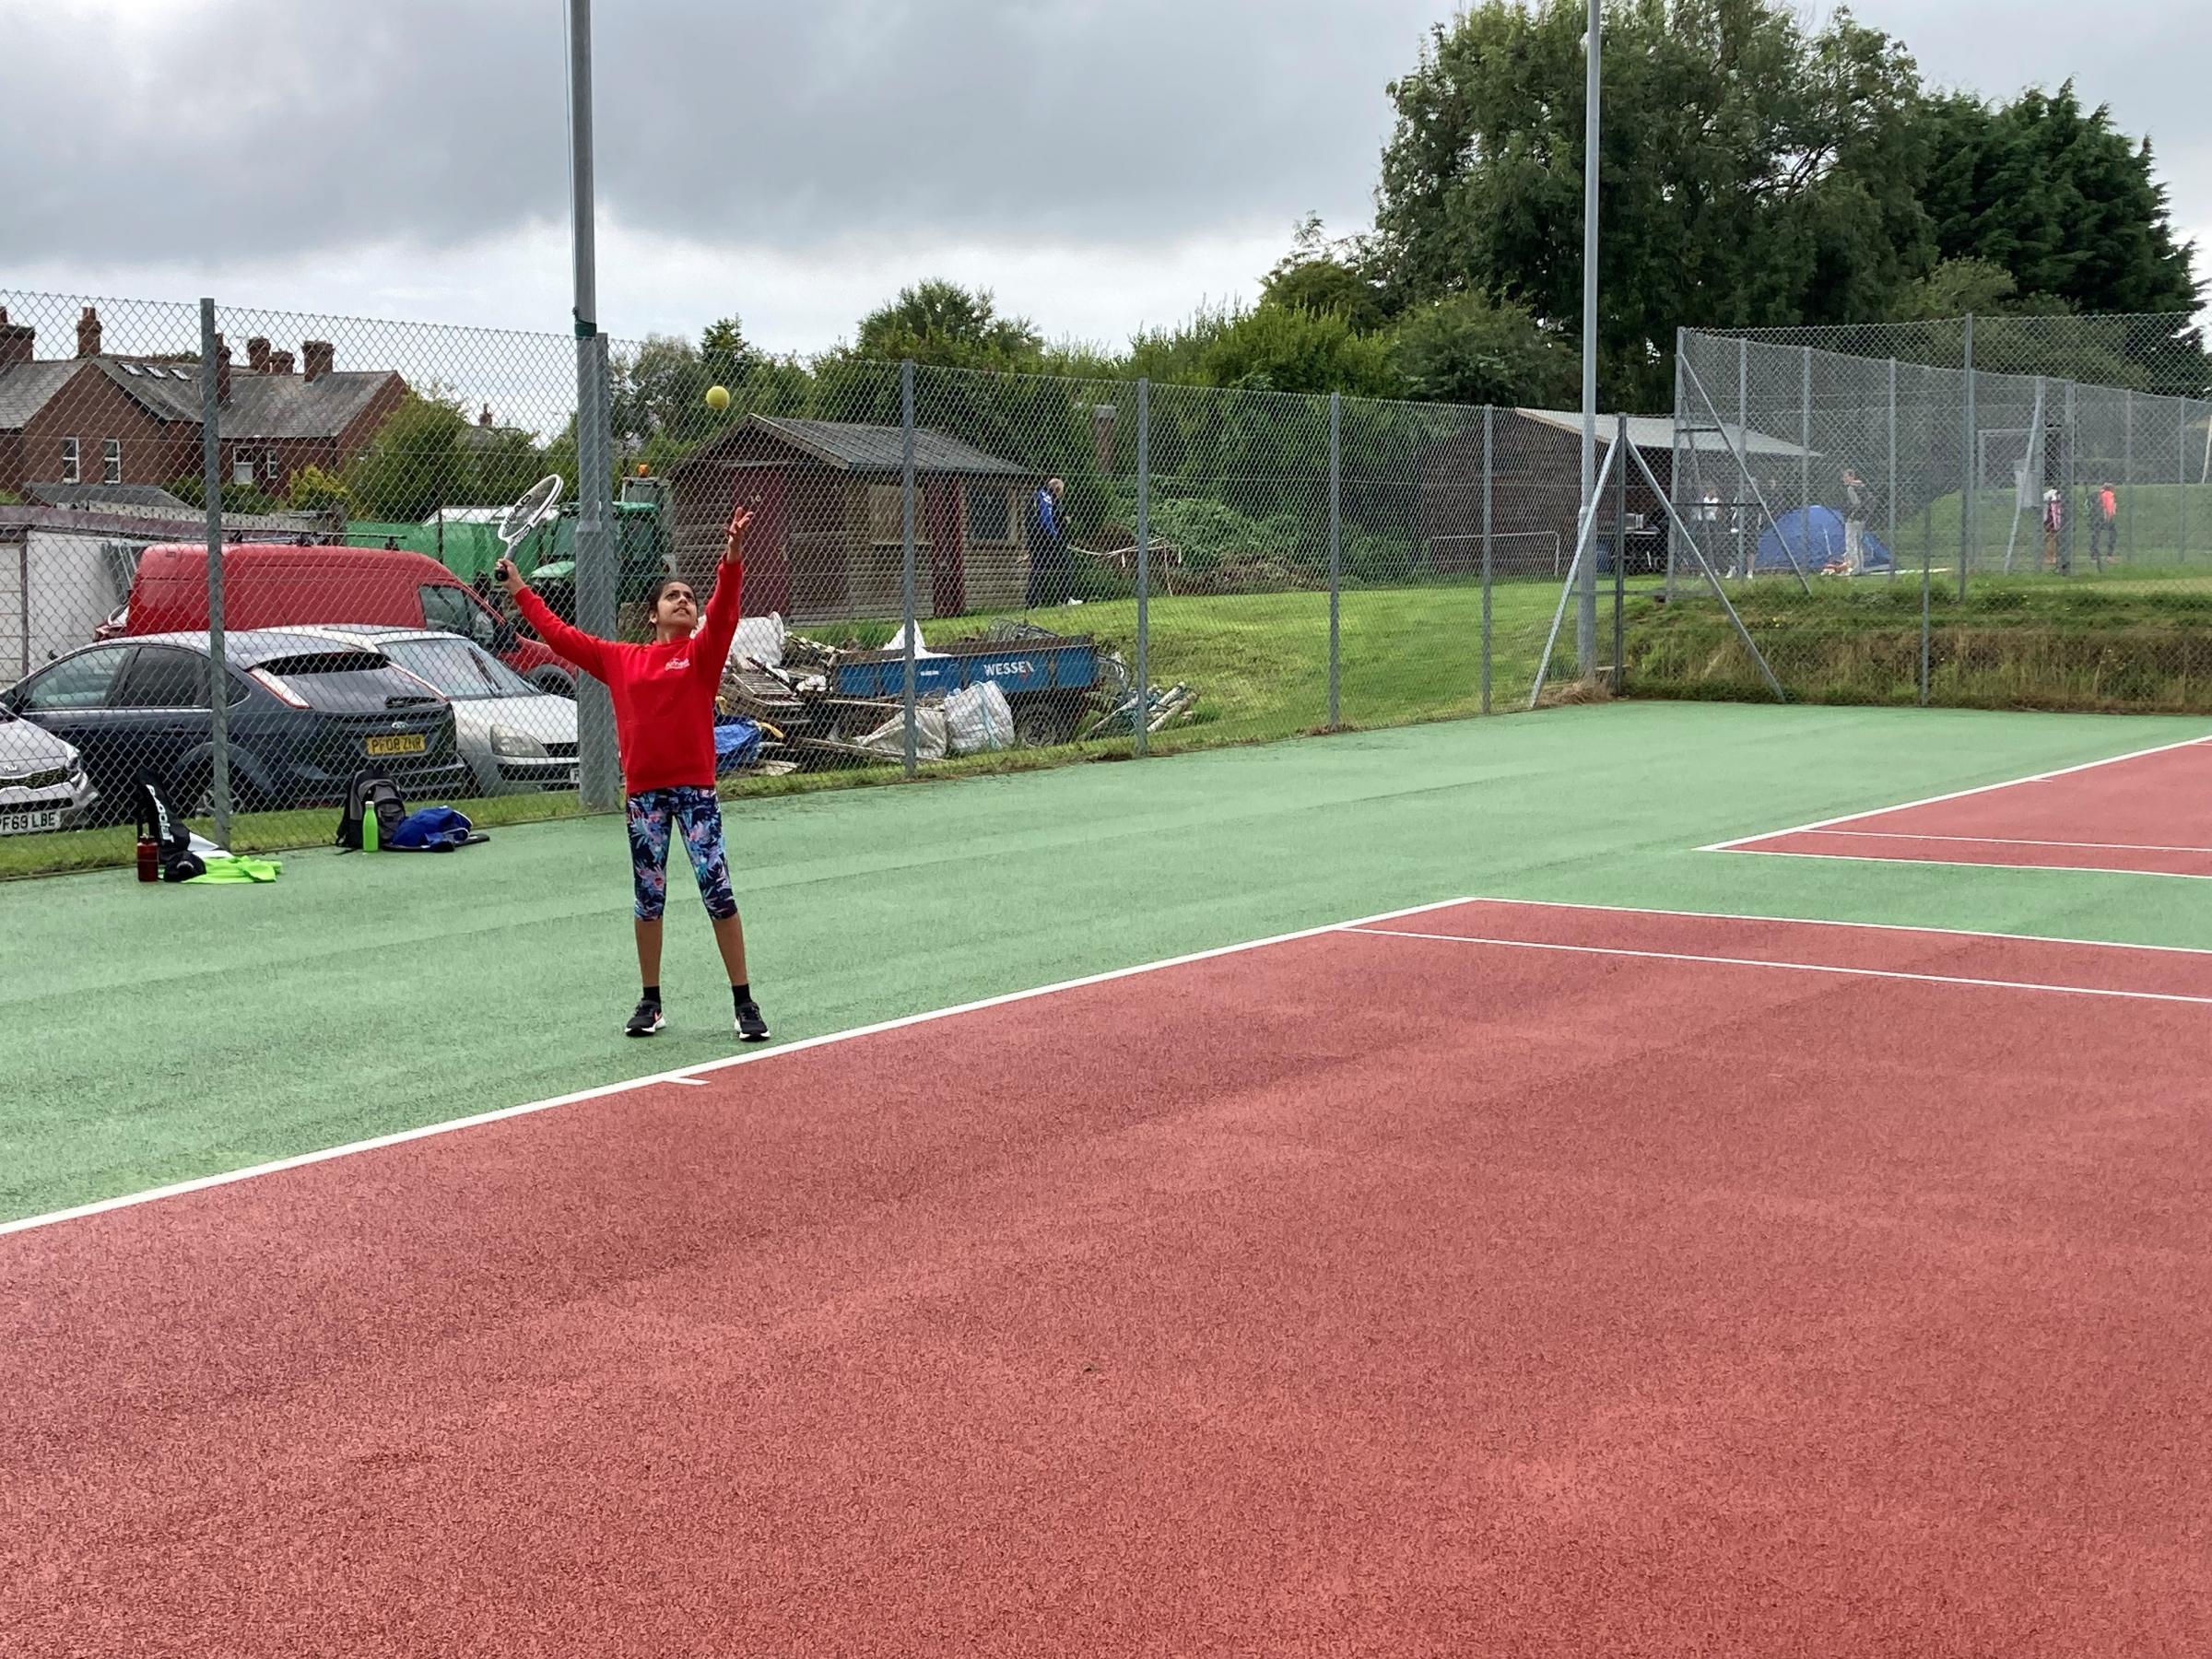 SMASH: Rhea Kshetrapal serving on Hawcoat Park’s newly opened tennis courts